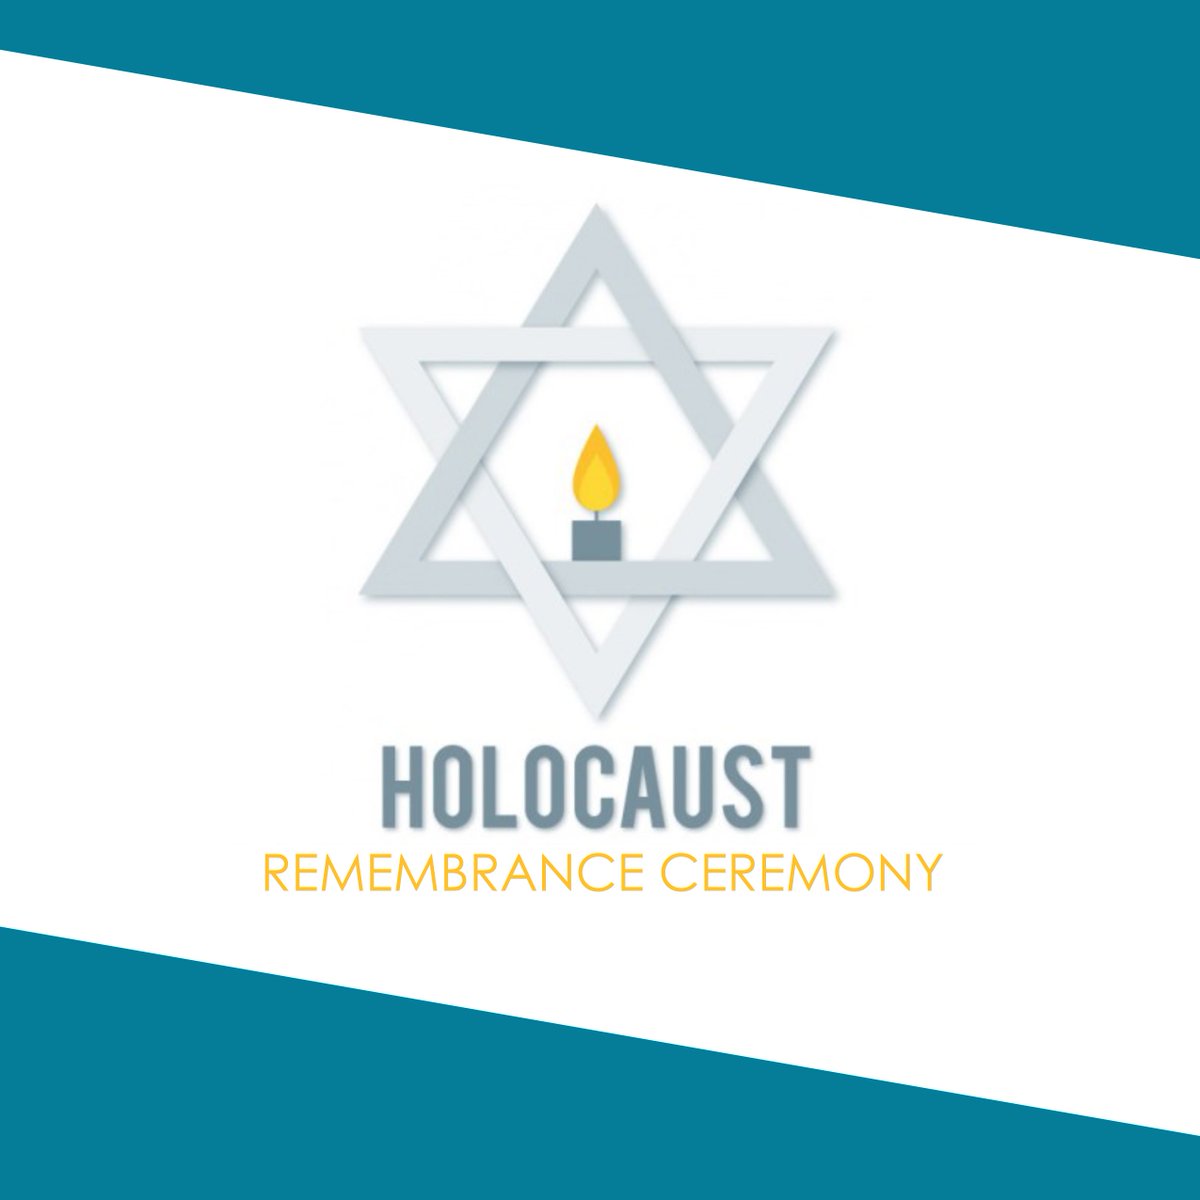 Join us Thursday, April 21st at 7 pm for the Holocaust Remembrance Ceremony with keynote speaker Holocaust Survivor Esther Geizhals. The Ceremony will be held in the Town Hall Board Room and broadcast Live on Optimum channel 20, Verizon FiOS channel 33, and the Town website. https://t.co/XjuDwjmwor